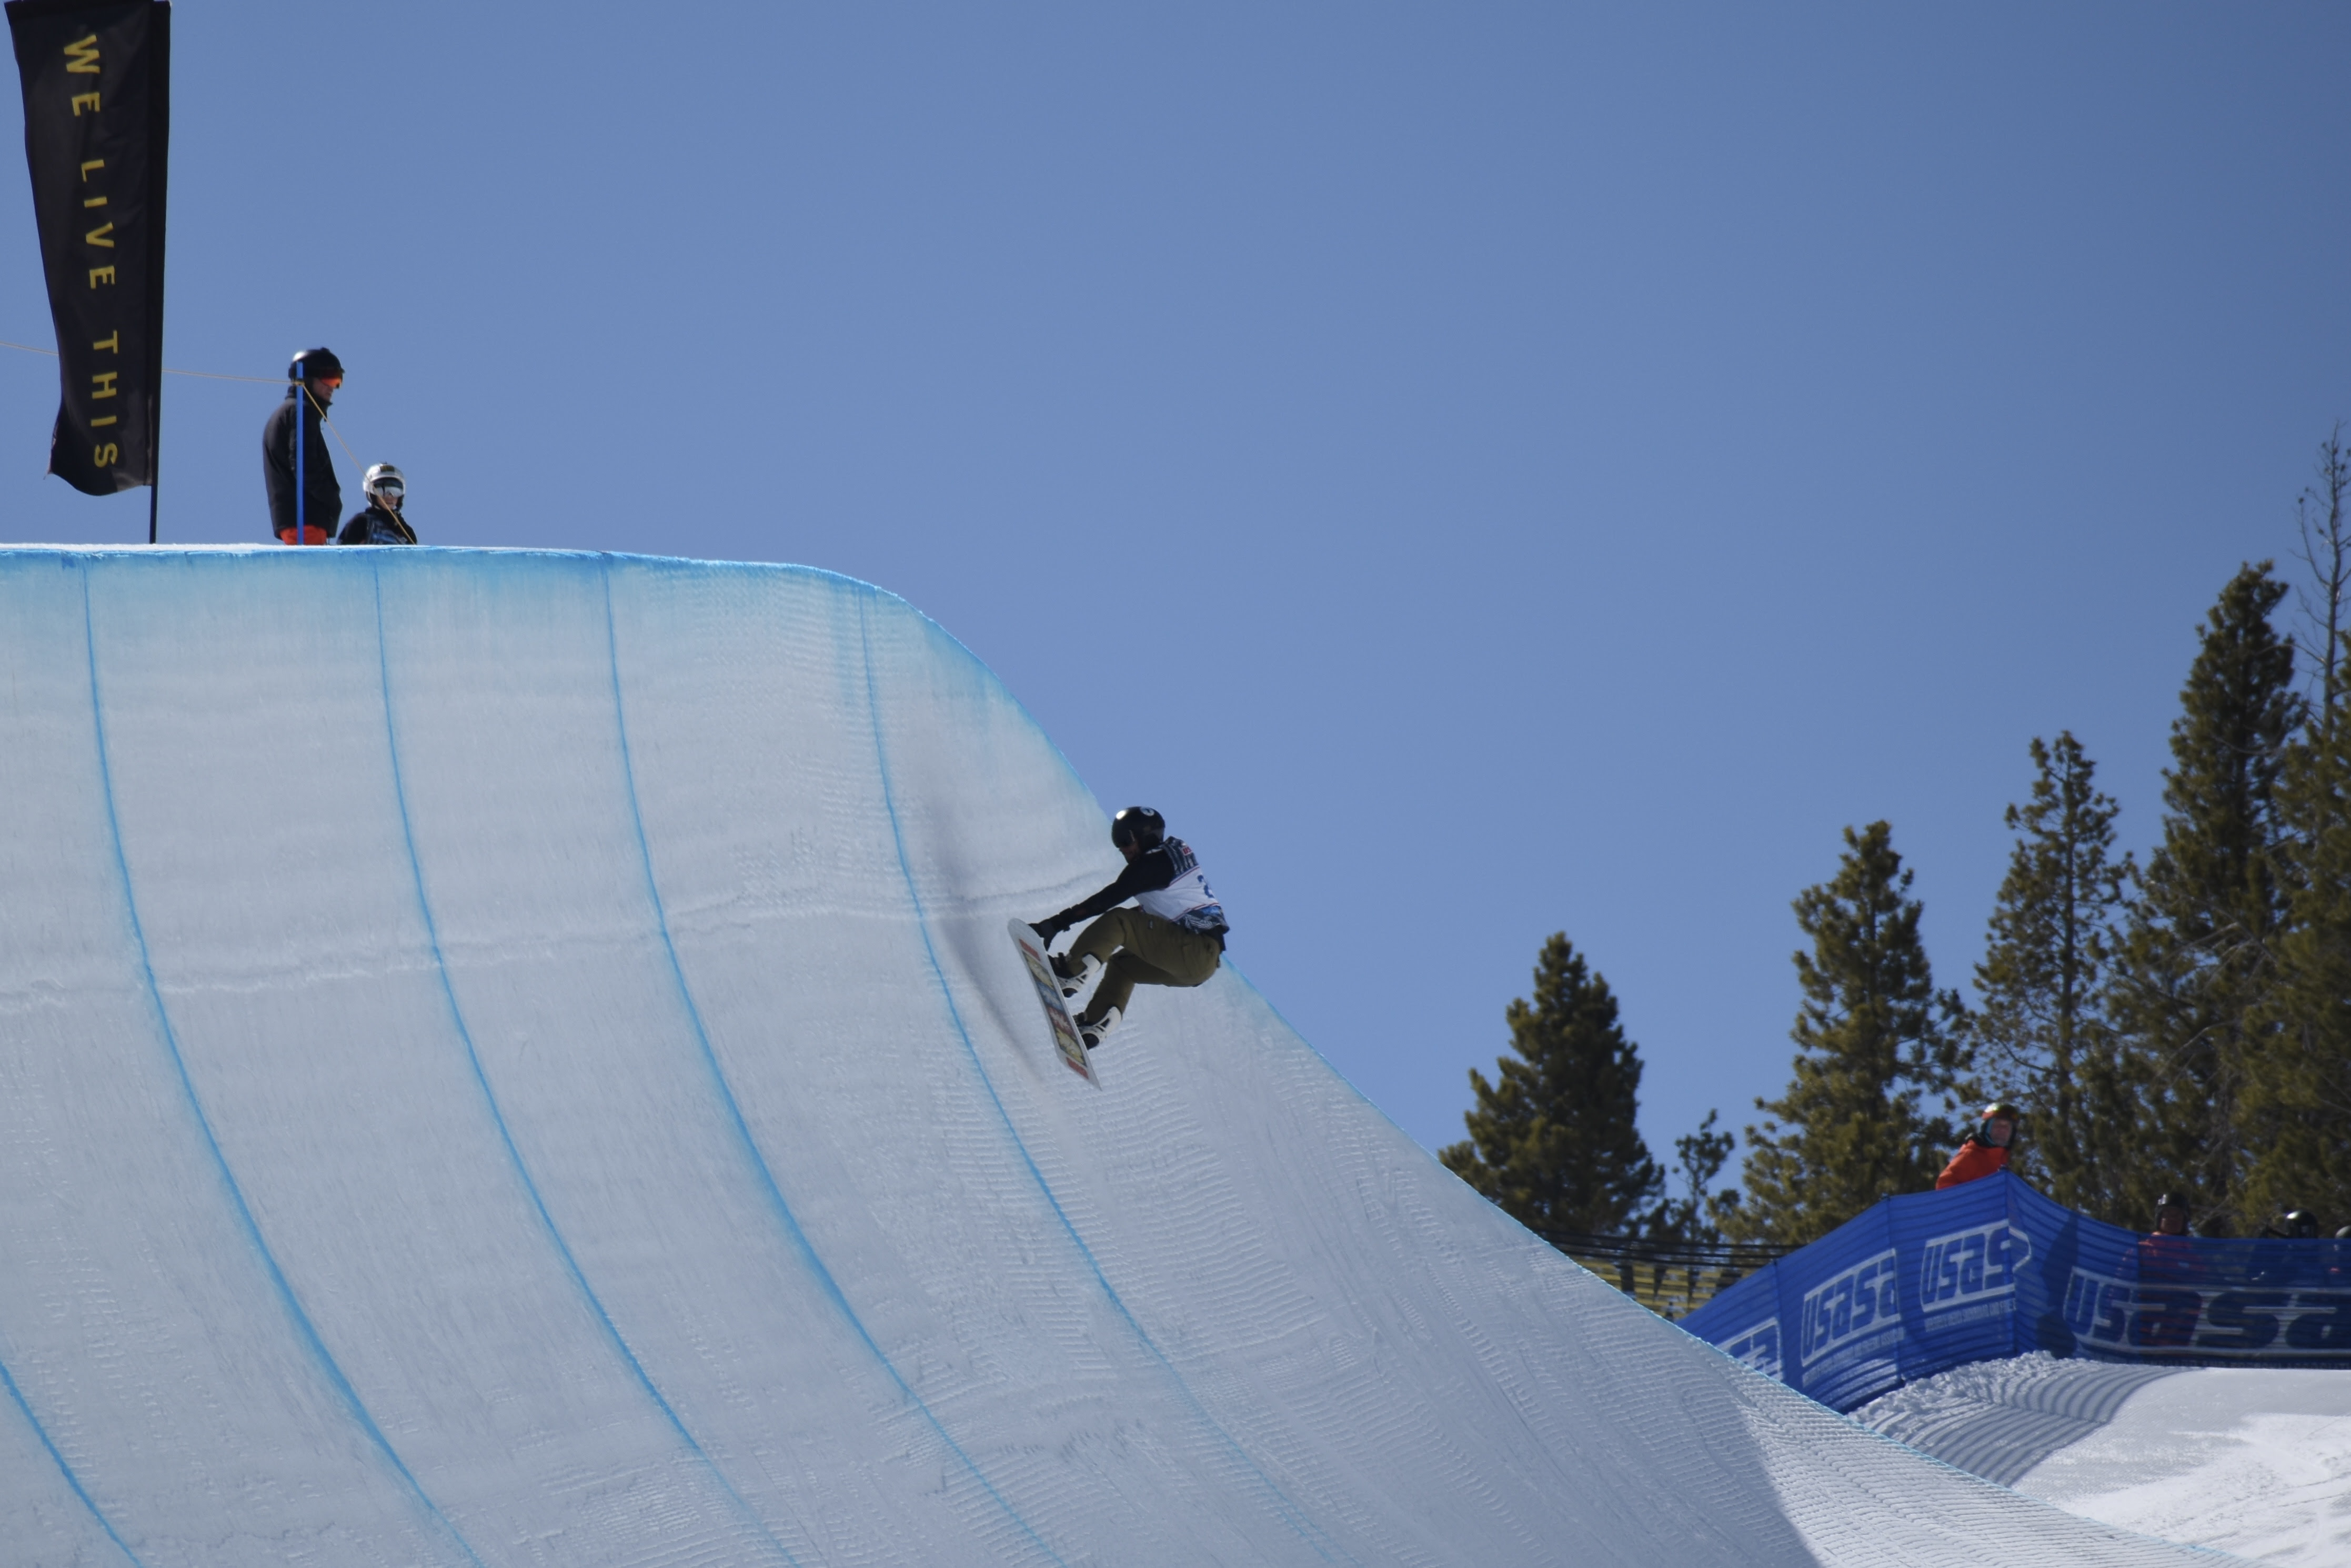 Zachary Elder competing in the 22’ Superpipe